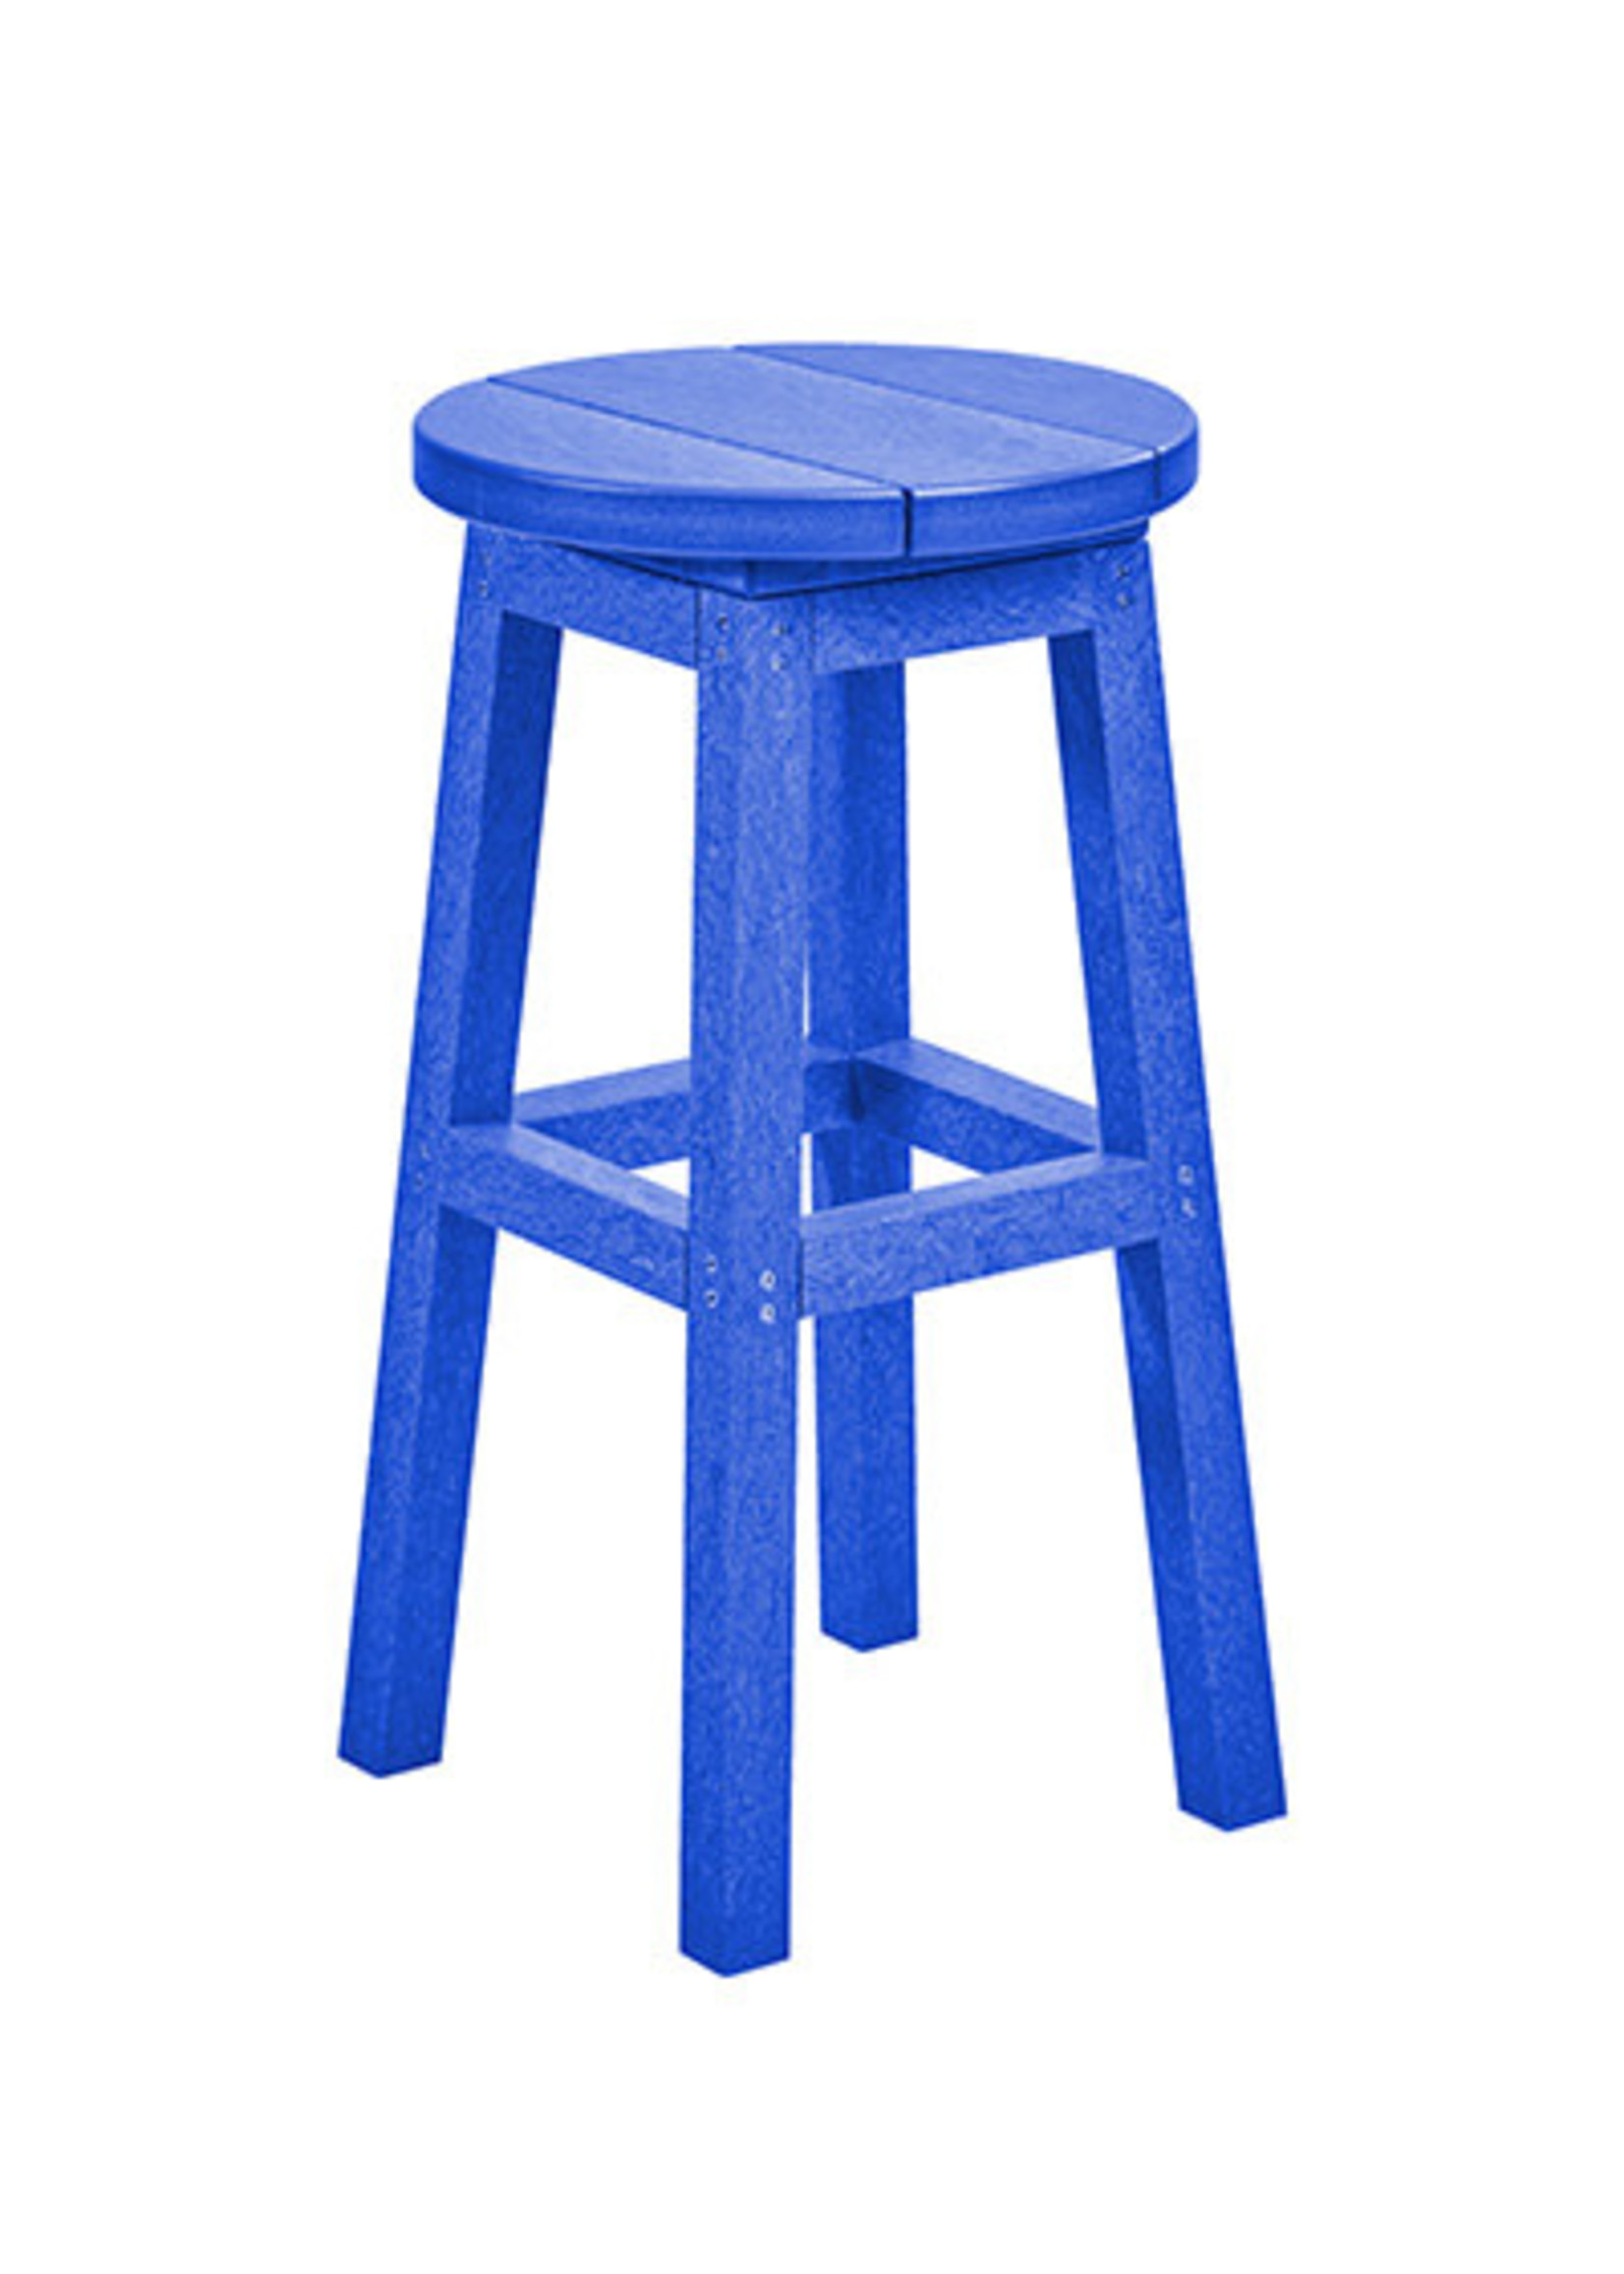 C.R. Plastic Products Counter, Stool, Generation Line,